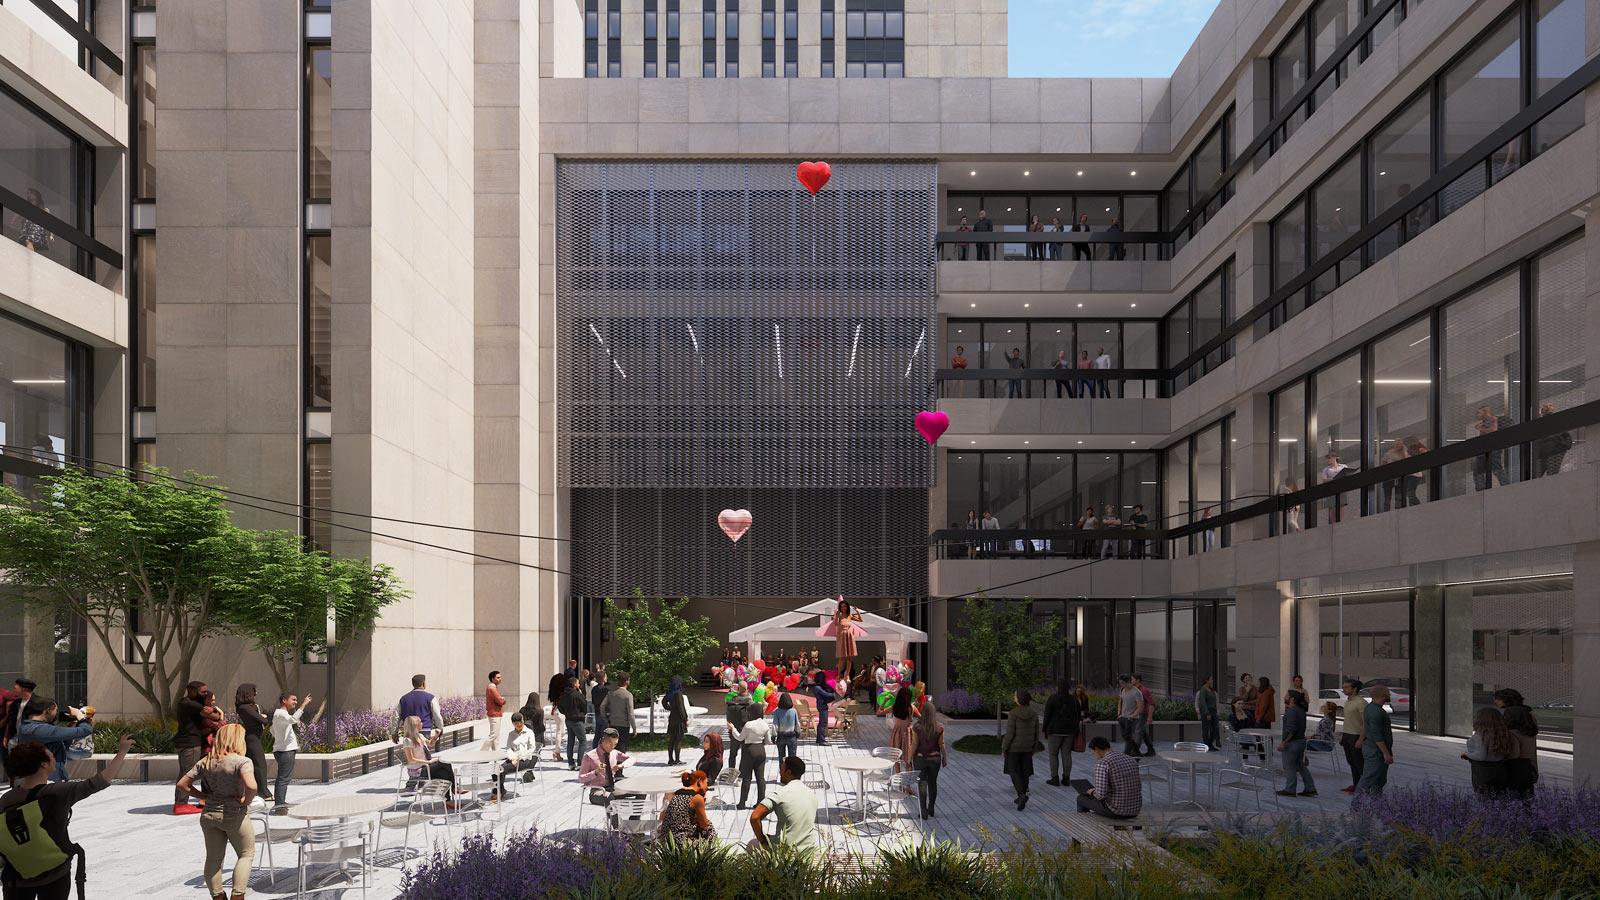 rendering of the future courtyard with theater venue and the facade of One Pace Plaza East